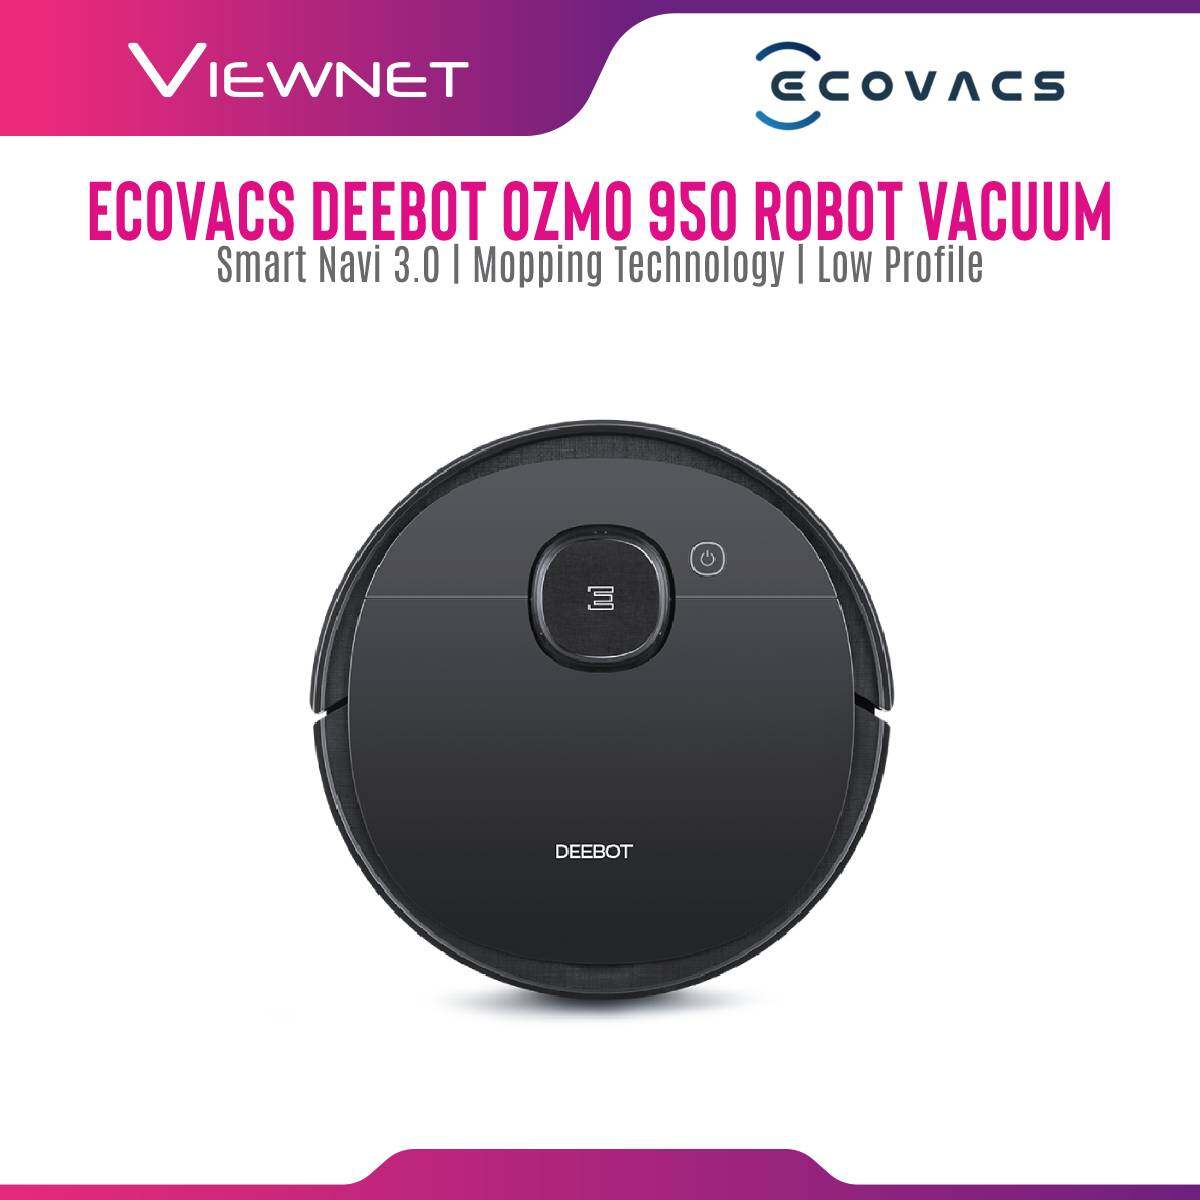 ECOVACS DEEBOT OZMO 950 Robot Vacuum Cleaner With ã€Mopping Powerful Full Coverage Cleaningã€‘Smart Navi 3.0TM /Longer Working Time/200min ,Intelligent Robotic Vacuum and Portable Cordless Handheld Vacuum[Local Shipping&I Year Waranty]